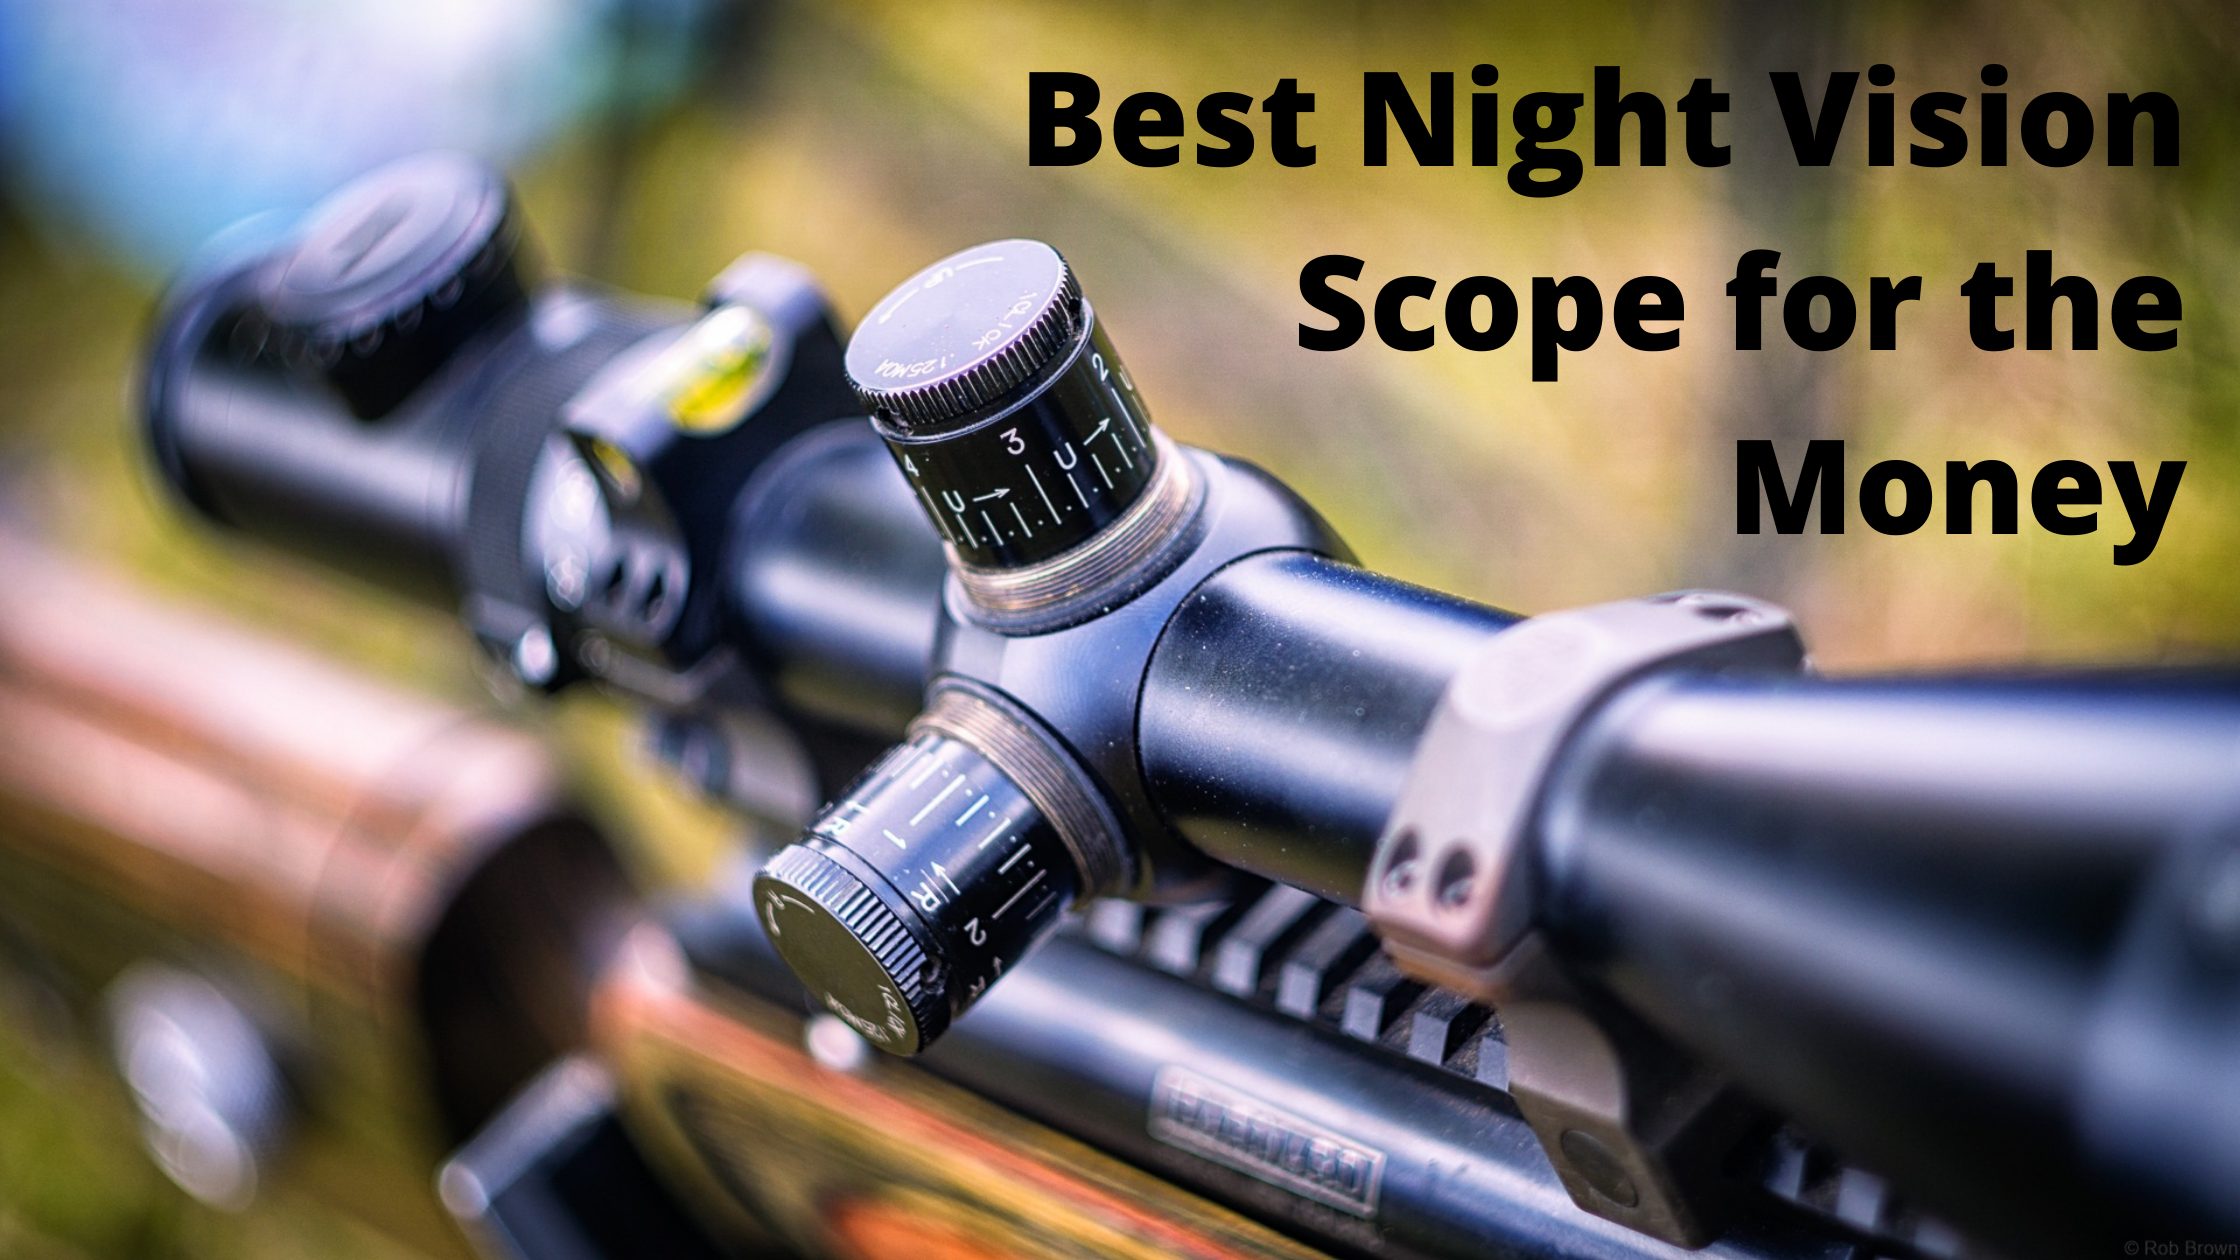 Best Night Vision Scope for the Money